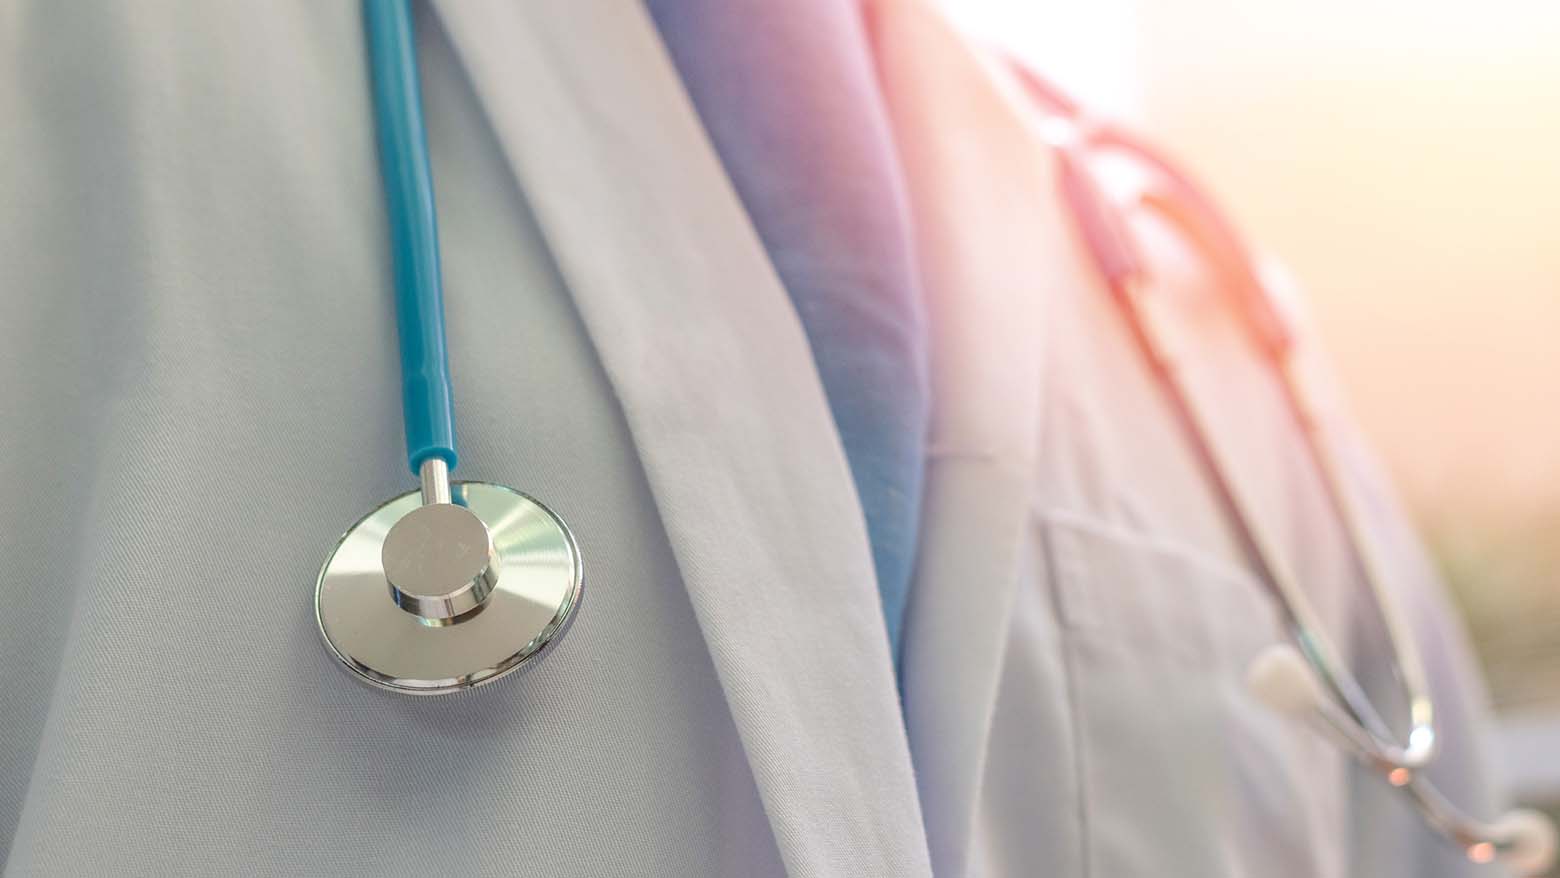 Close up of a doctor wearing a medical coat and stethoscope